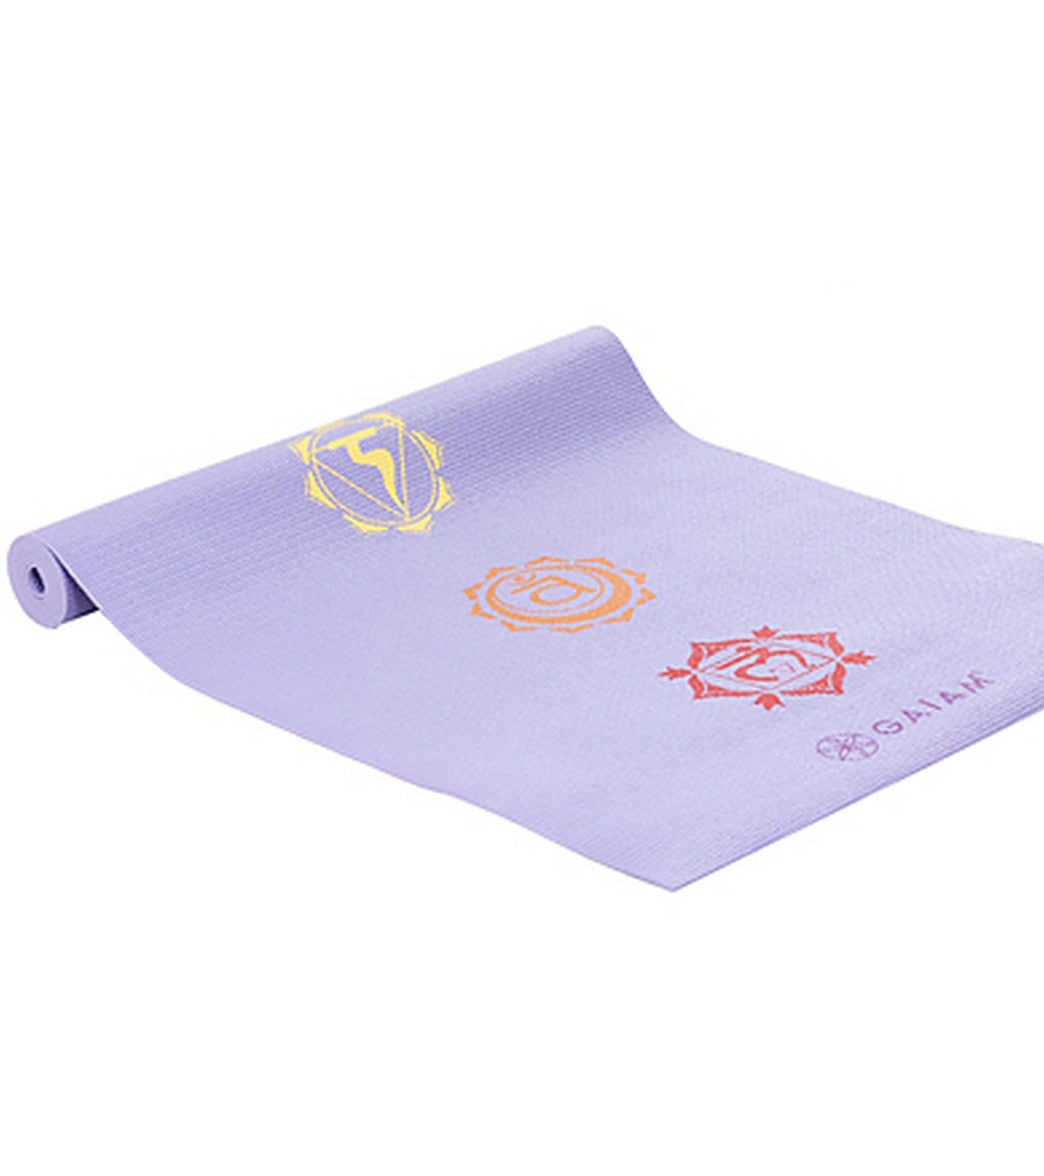 Gaiam - Yoga mats, fitness clothes and wellness products